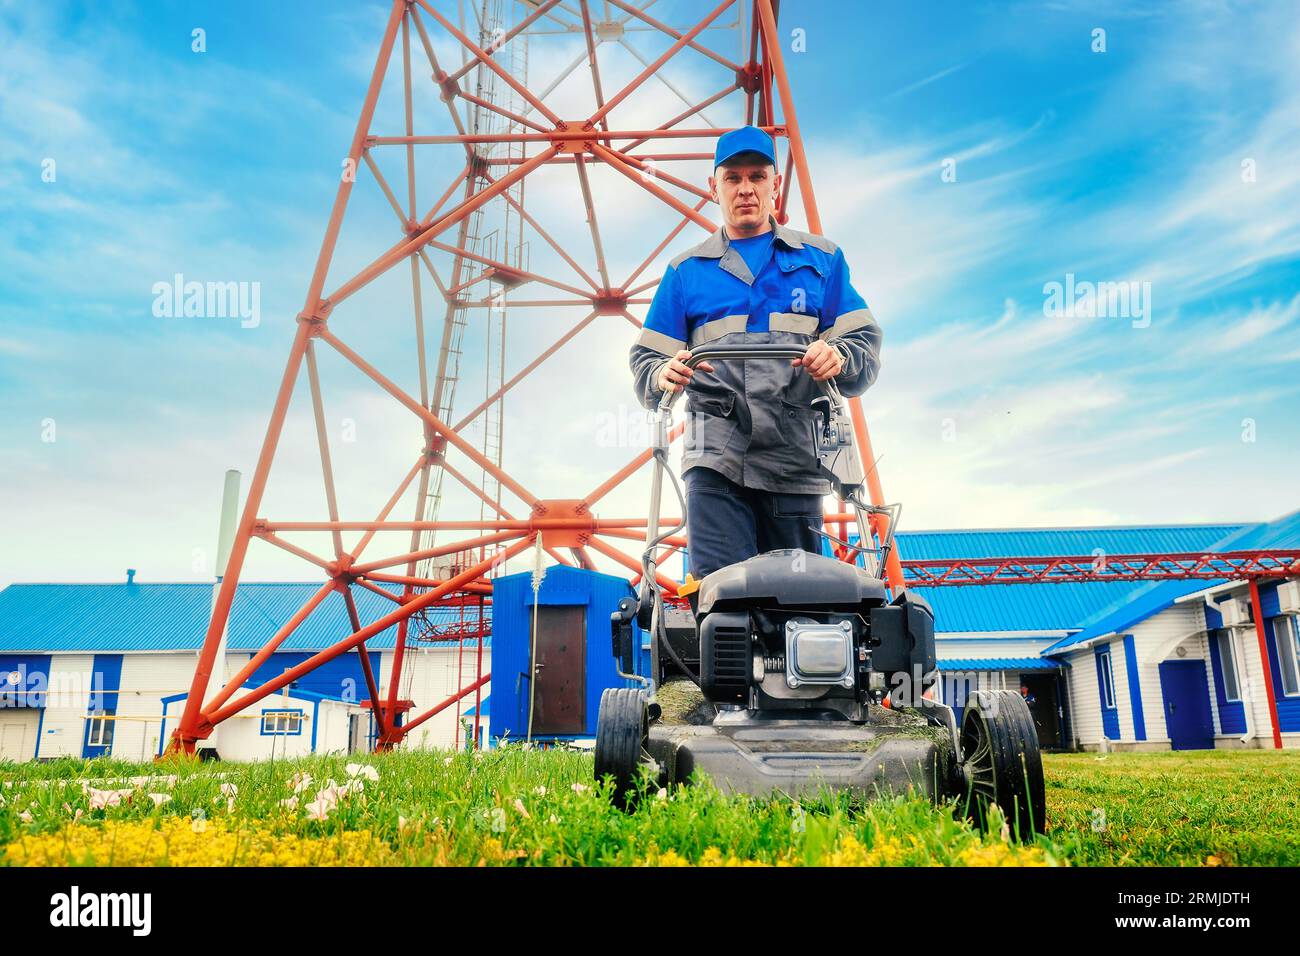 Worker in overalls mows territory of industrial facility with lawn mower. Handyman walks with lawn mower against blue sky. Stock Photo